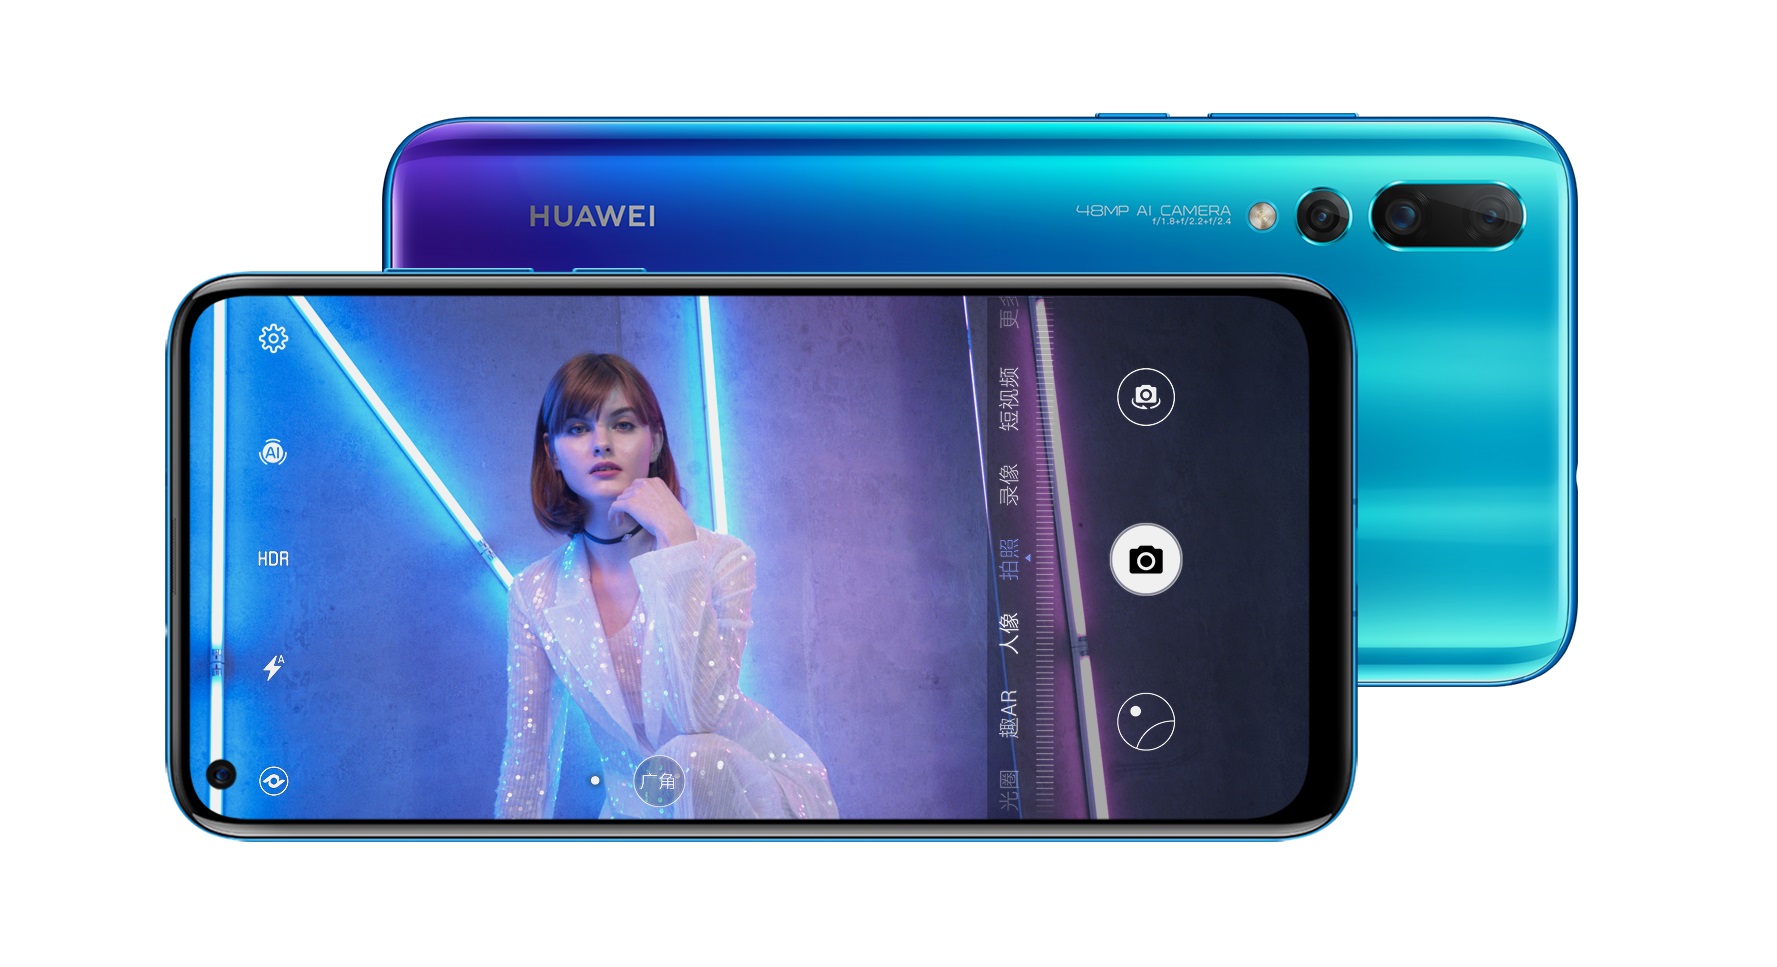 Huawei Nova 4 Launched with the worlds first 48MP Sony IMX586 Camera!